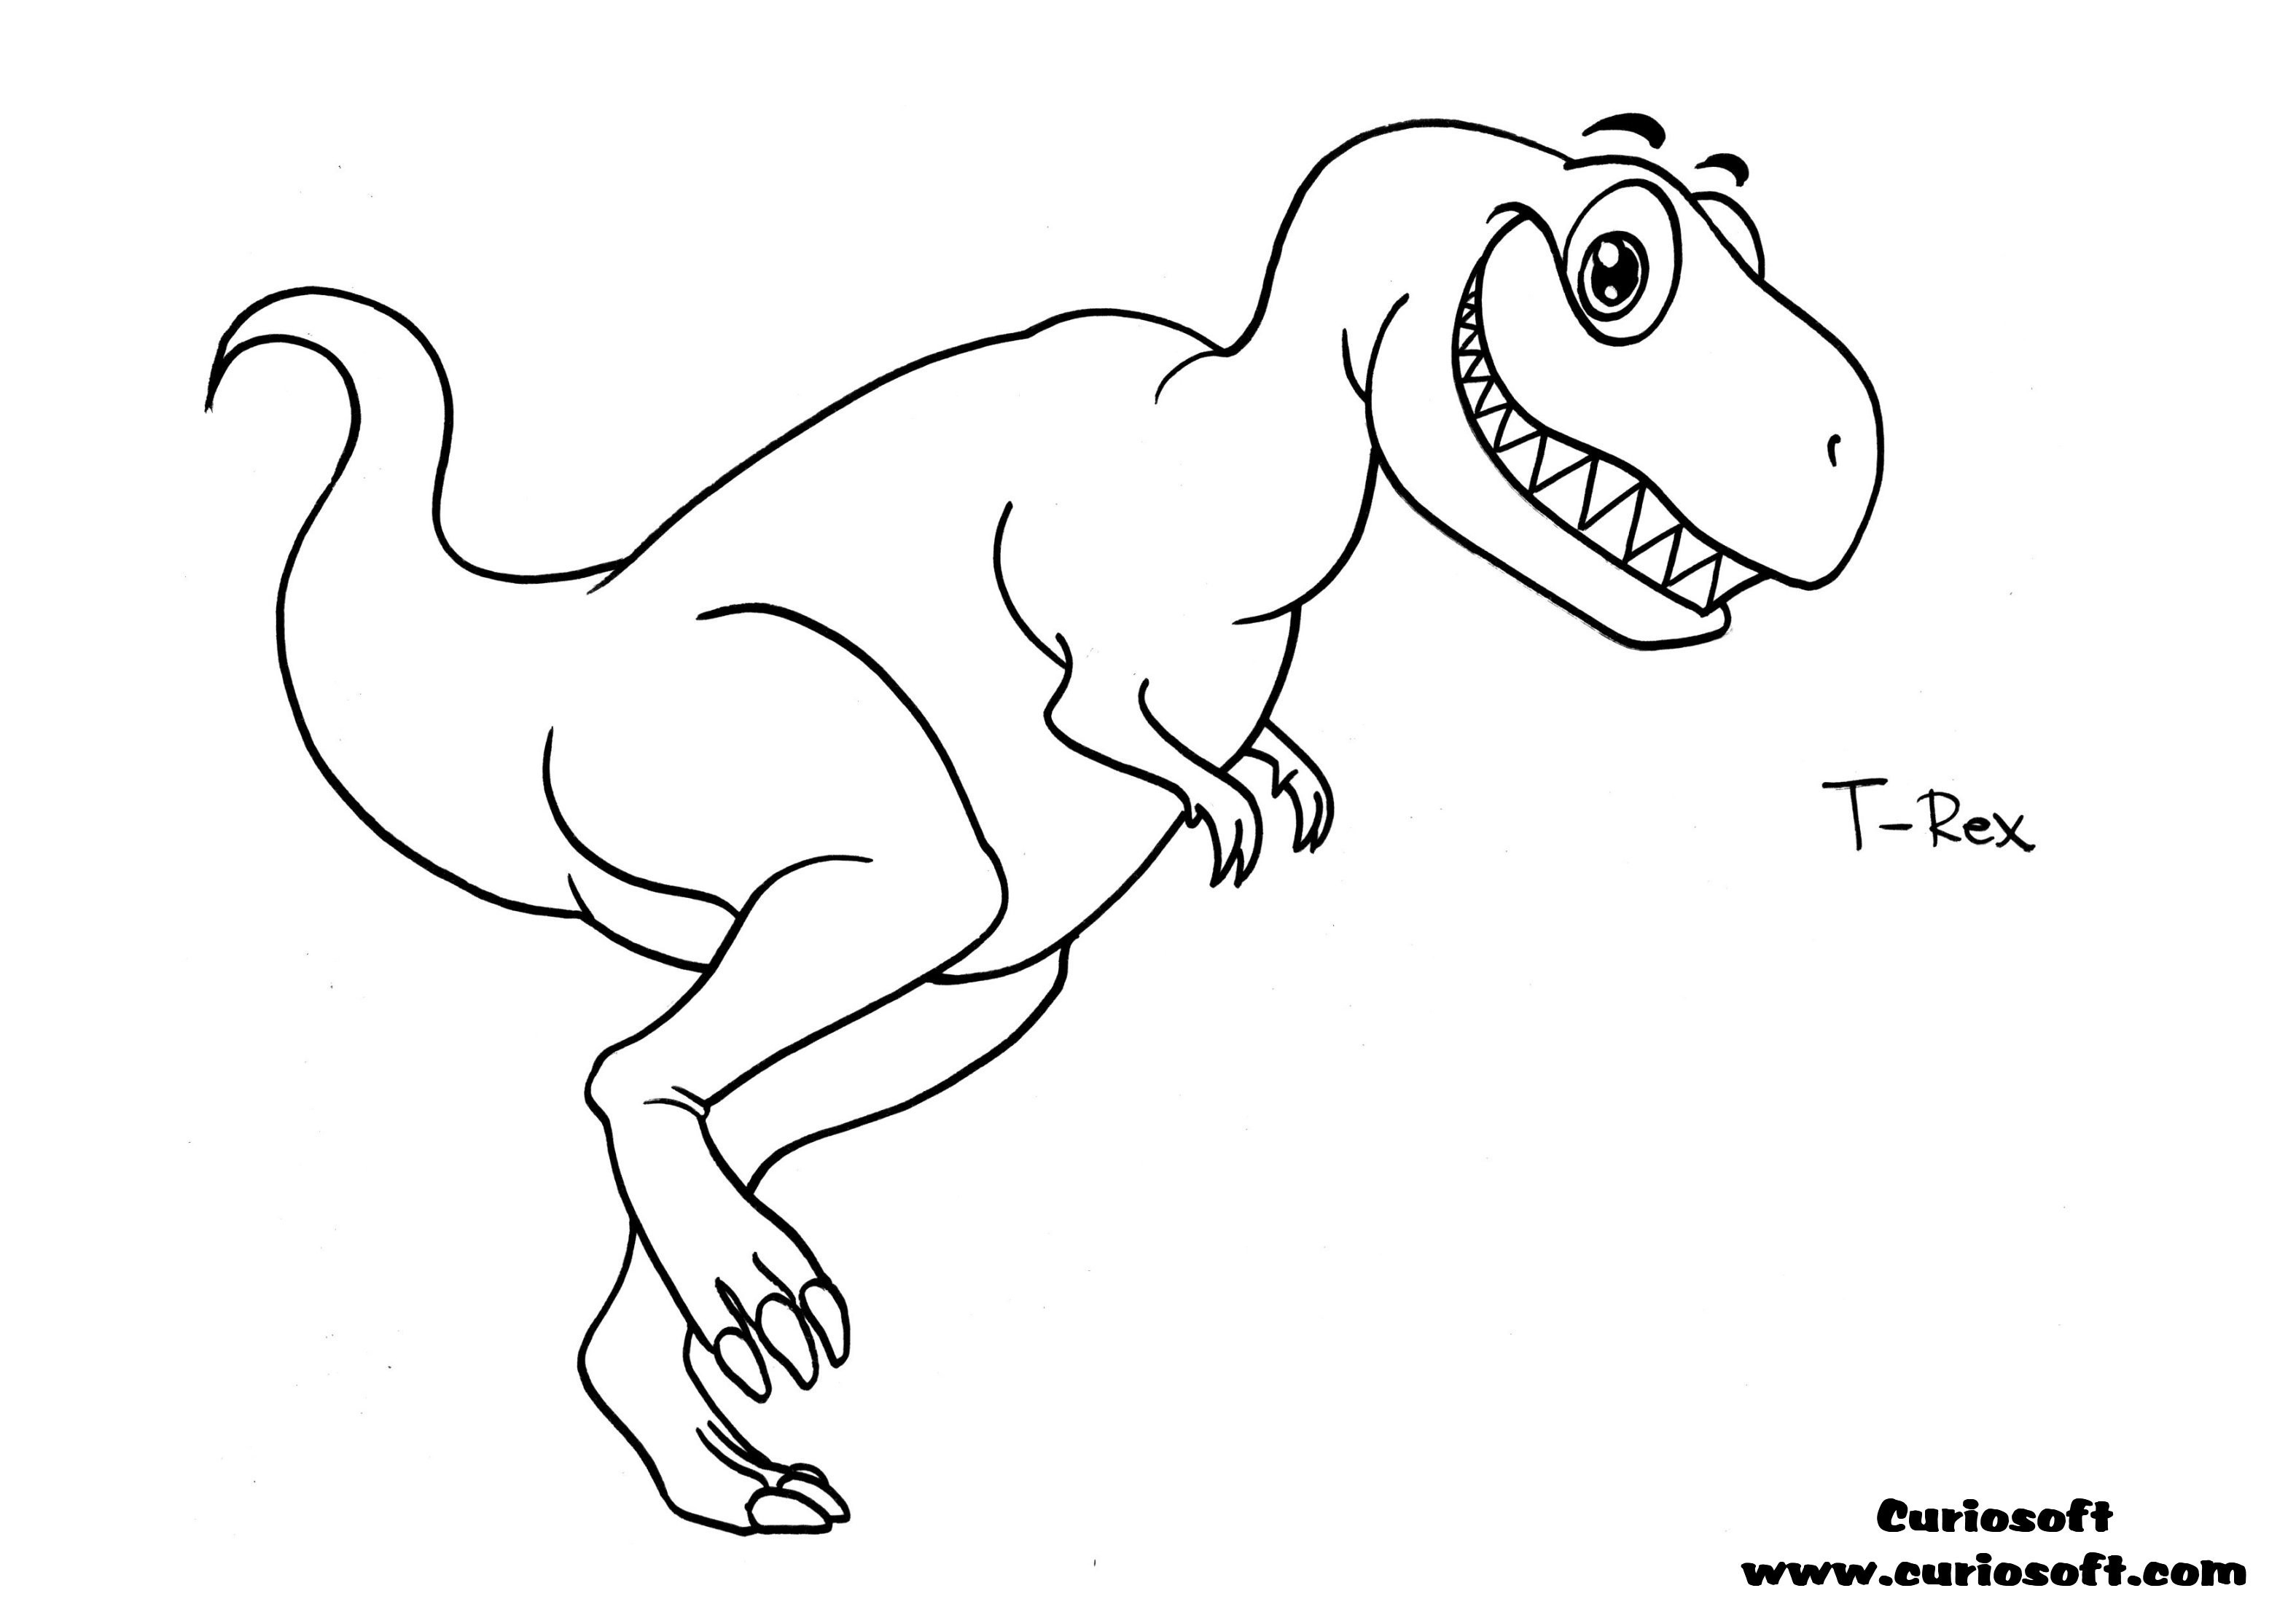 T-rex Coloring Book Pages Wallpaper